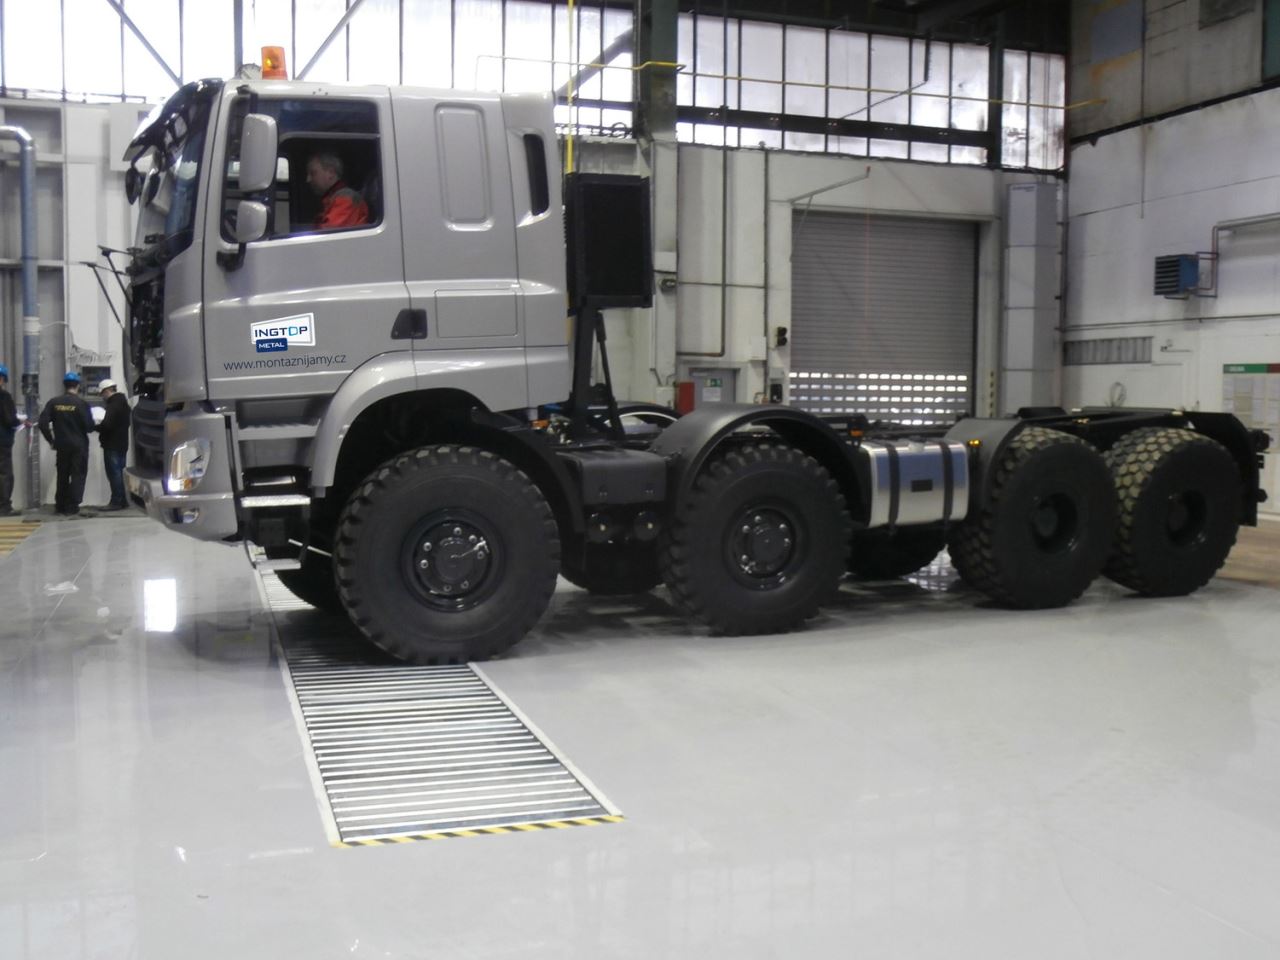 INGTOP METAL, s.r.o. delivered 4 tailored service pits to TATRA TRUCKS a.s. at a record time